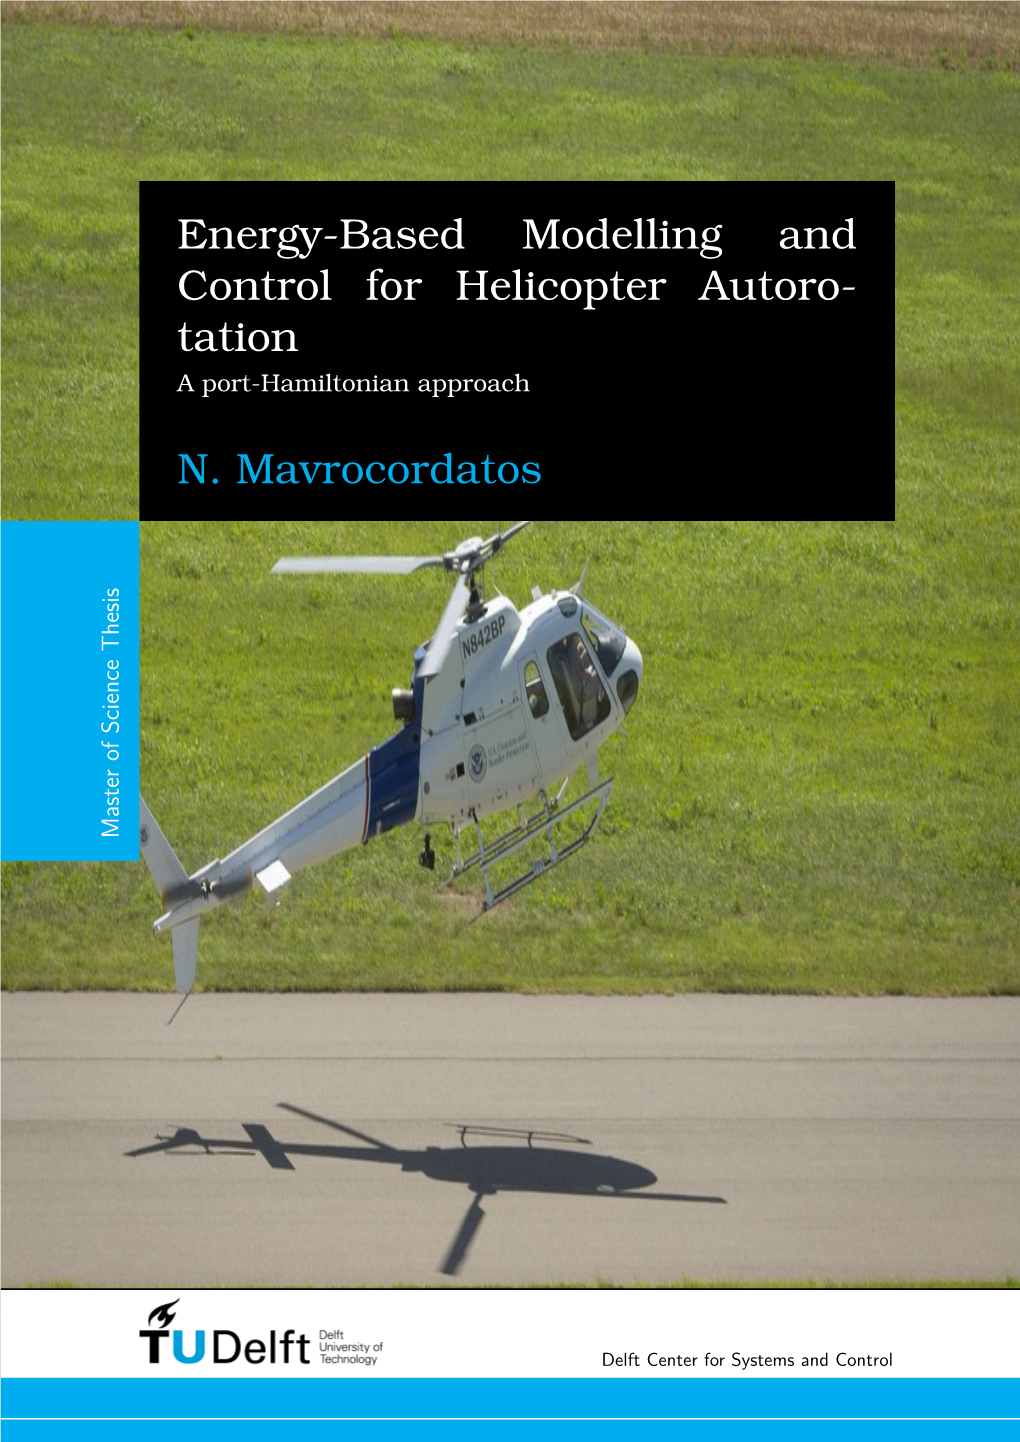 Energy-Based Modelling and Control for Helicopter Autorotation a Port-Hamiltonian Approach